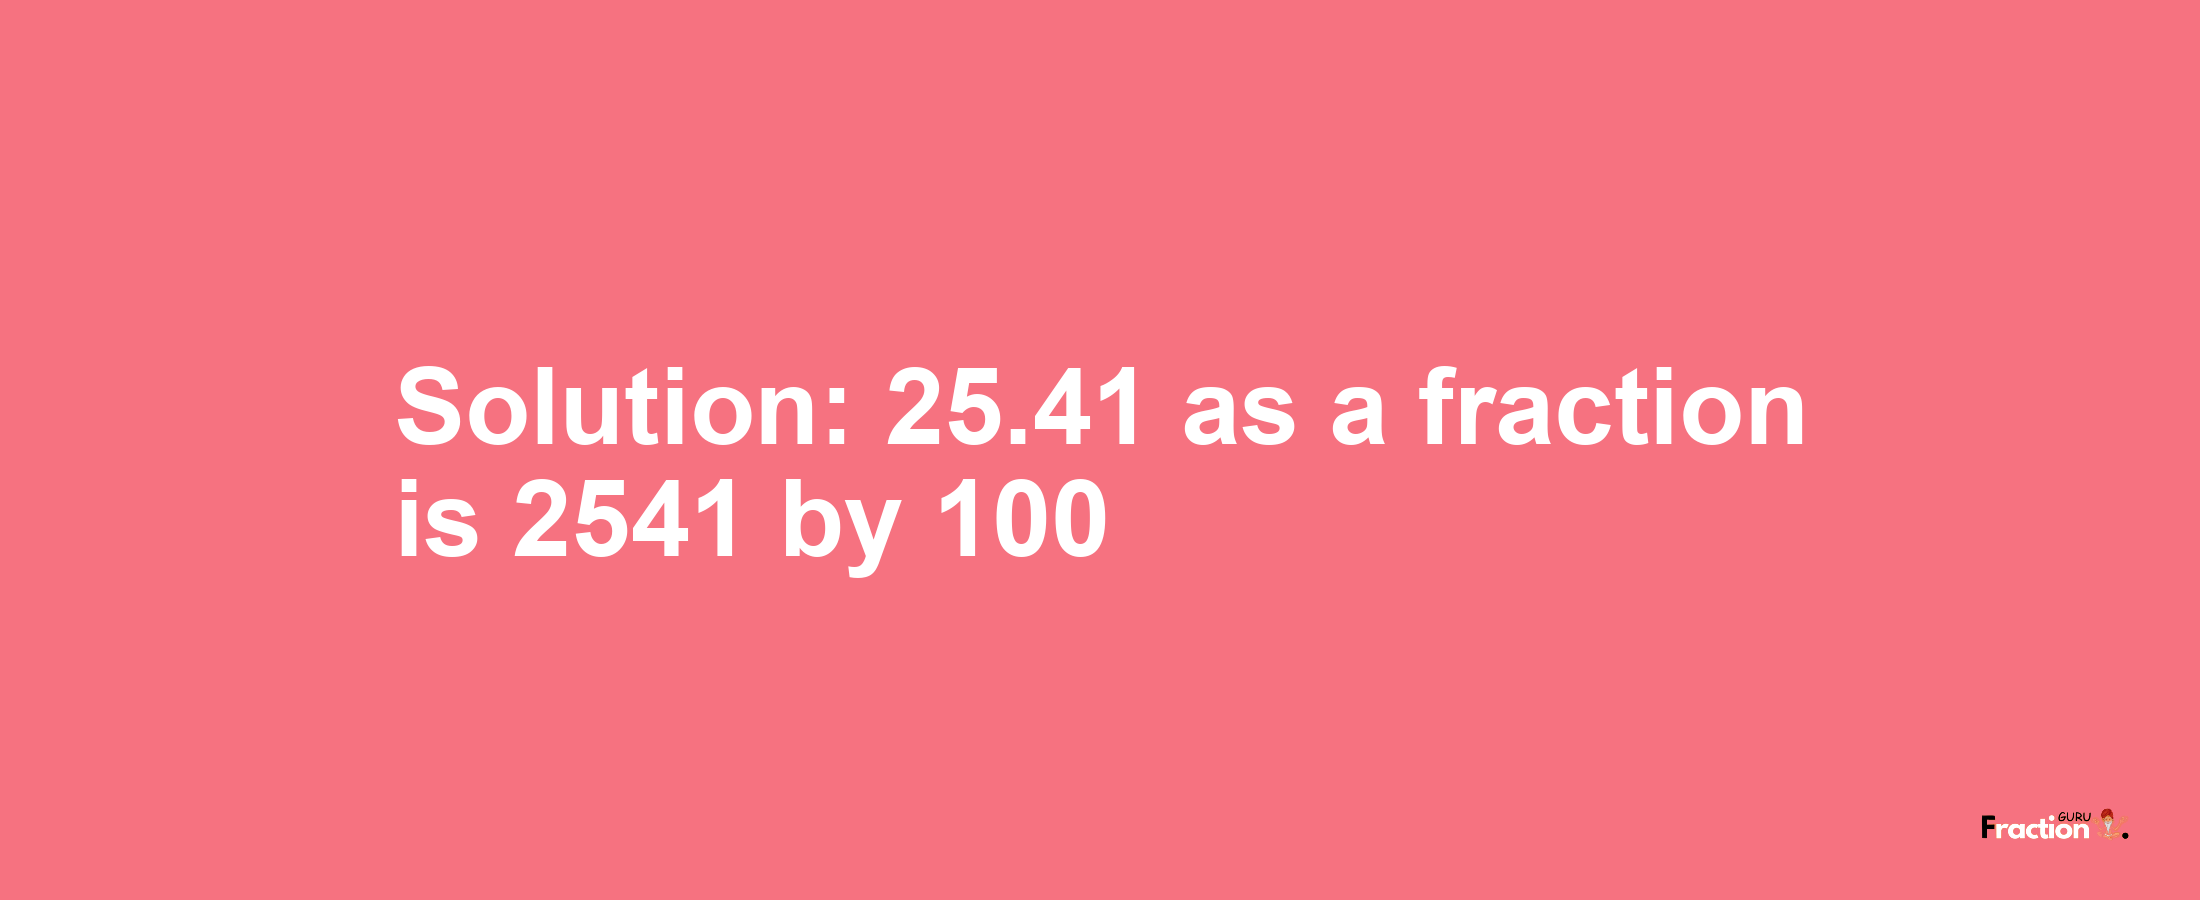 Solution:25.41 as a fraction is 2541/100